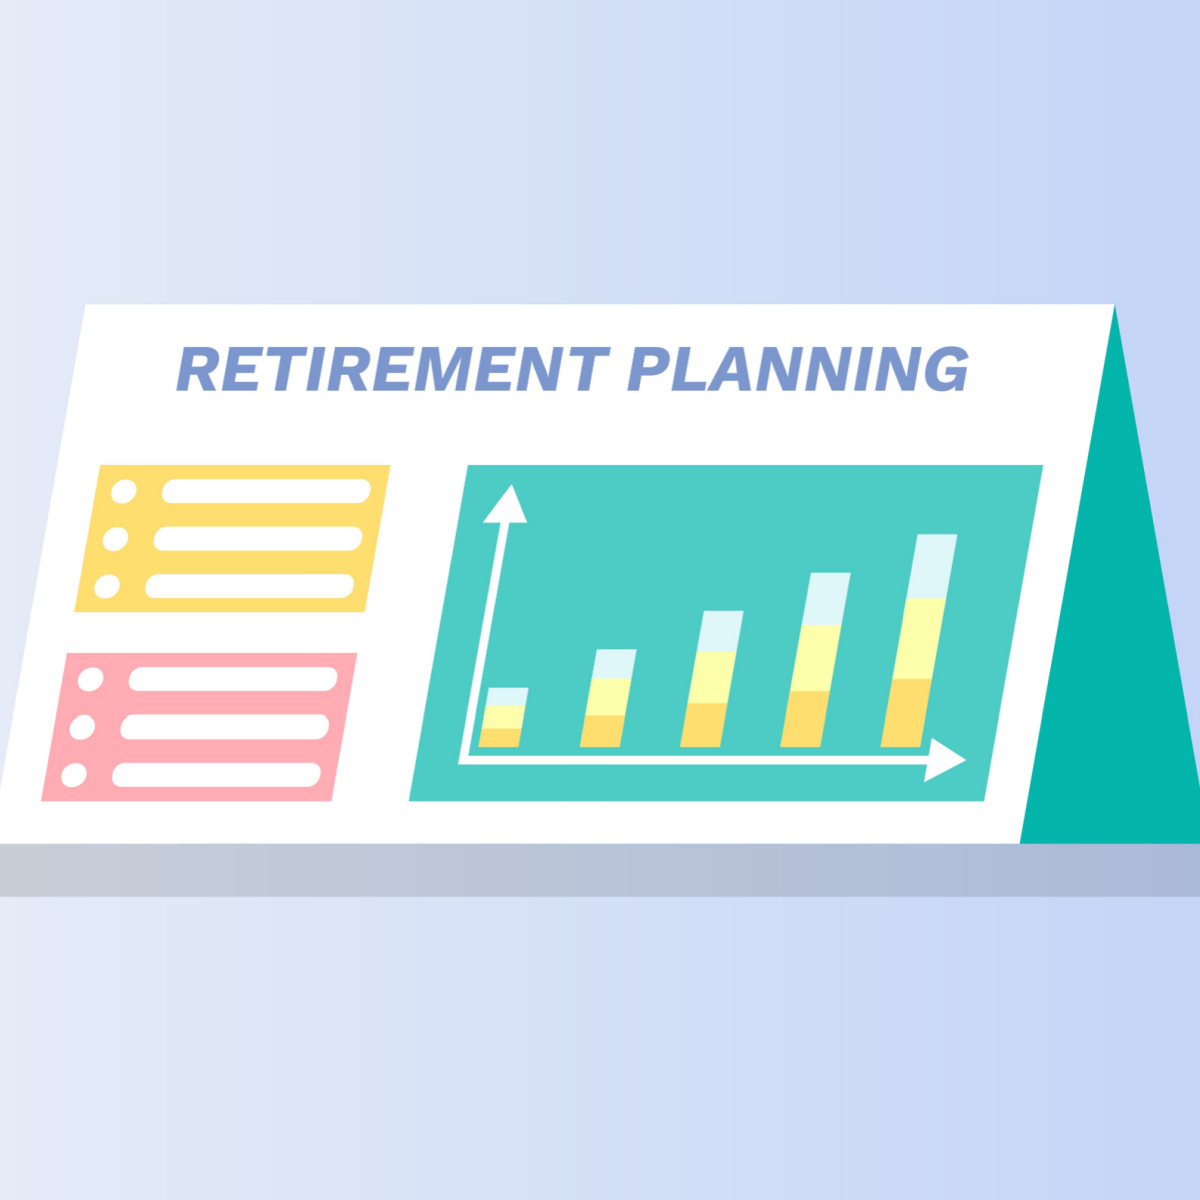 While it came down to the wire, both the House and Senate have now approved the much-anticipated SECURE 2.0 Act of 2022 as part of the mammoth $1.7 trillion omnibus spending bill.
#DavisBacon #RetirementPlanningServices
bit.ly/3X0dNaO